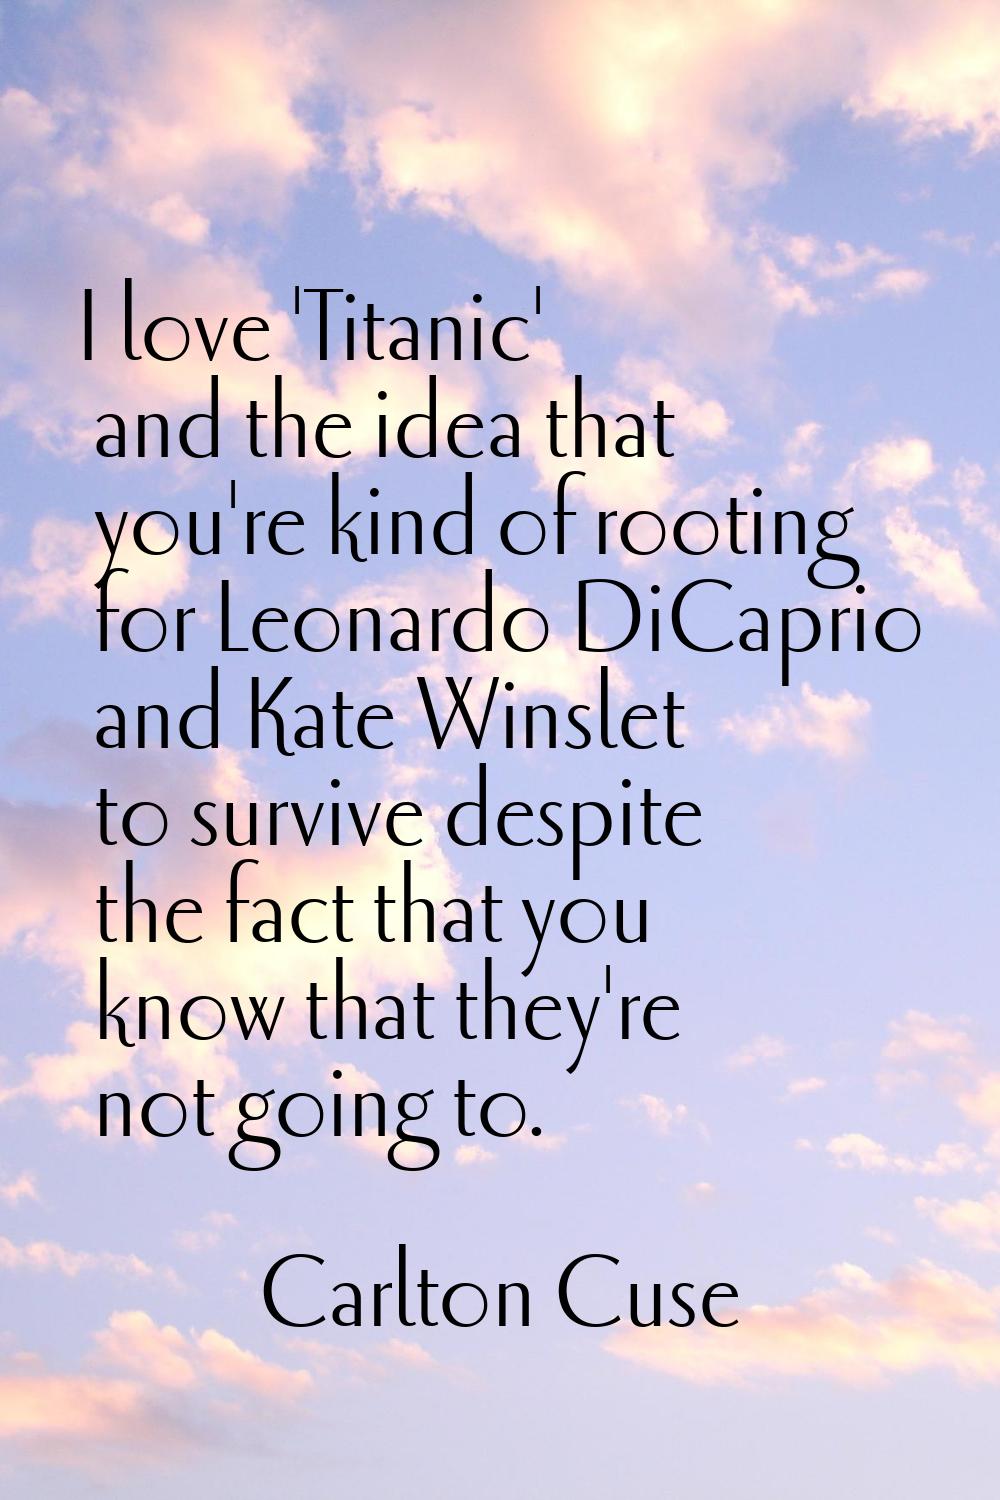 I love 'Titanic' and the idea that you're kind of rooting for Leonardo DiCaprio and Kate Winslet to